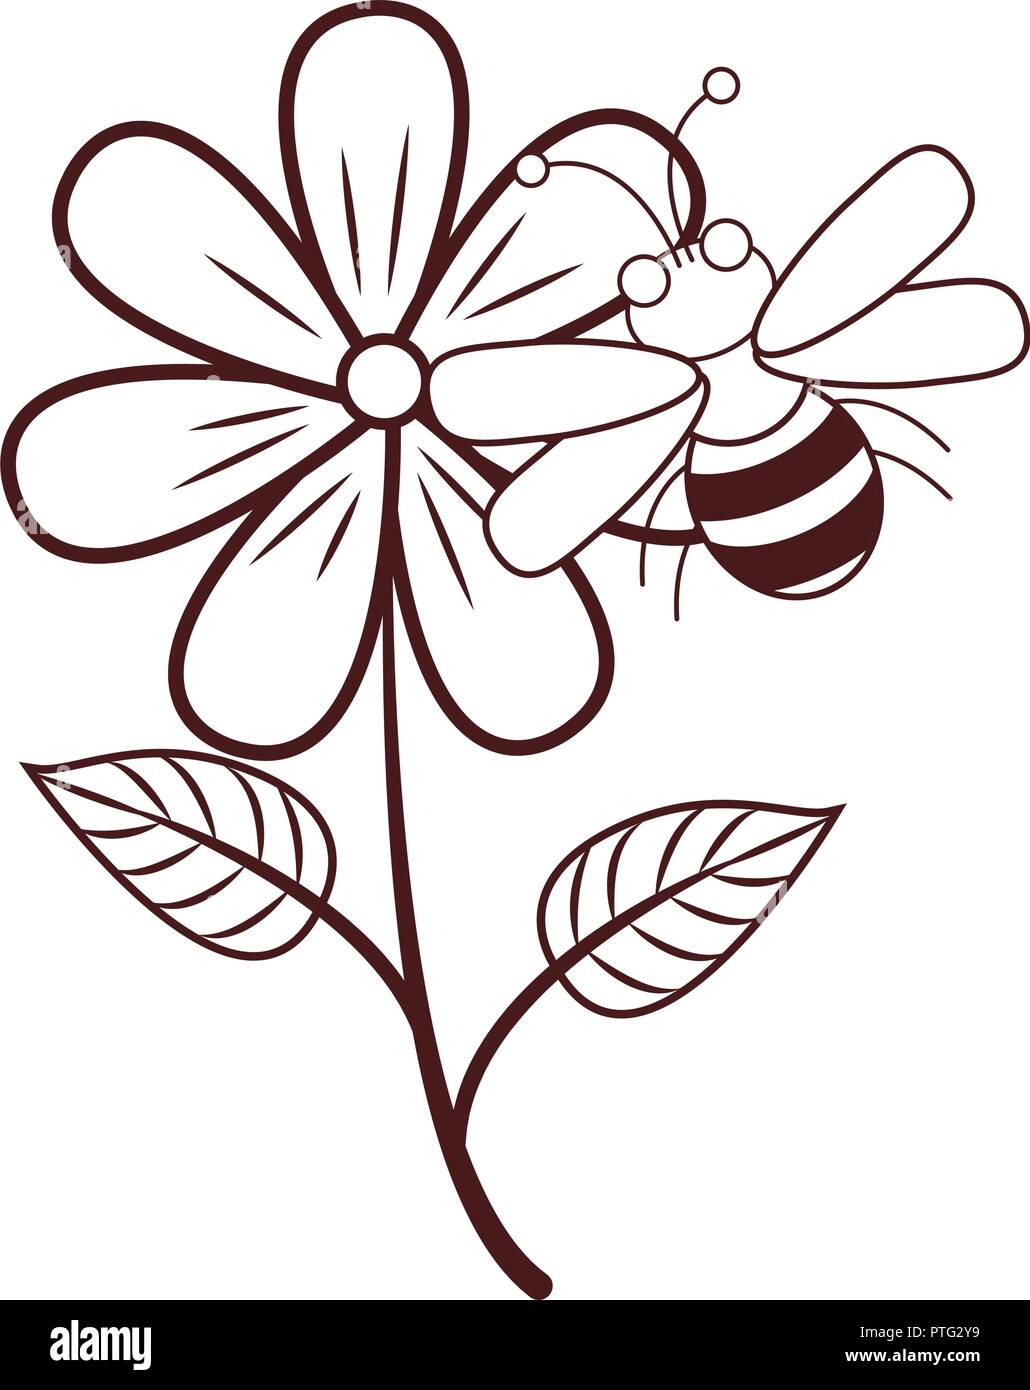 30679 Bees Flowers Drawing Images Stock Photos  Vectors  Shutterstock